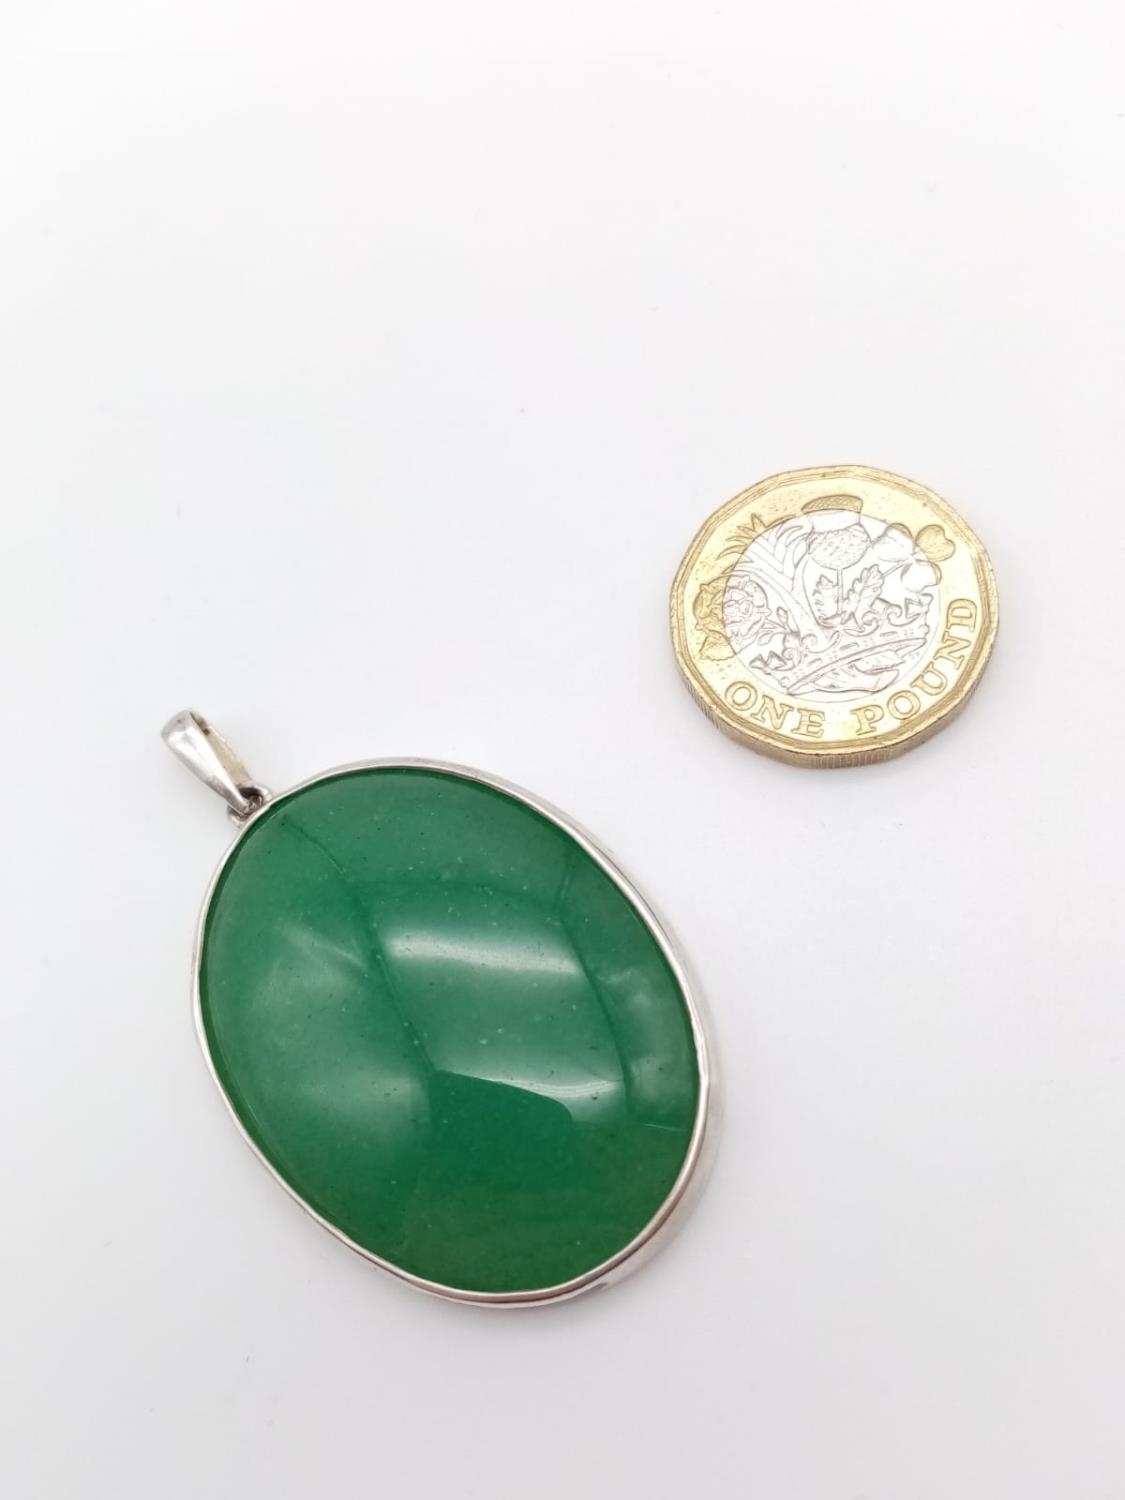 Large oval jade silver pendant, weight 16g approx - Image 4 of 4